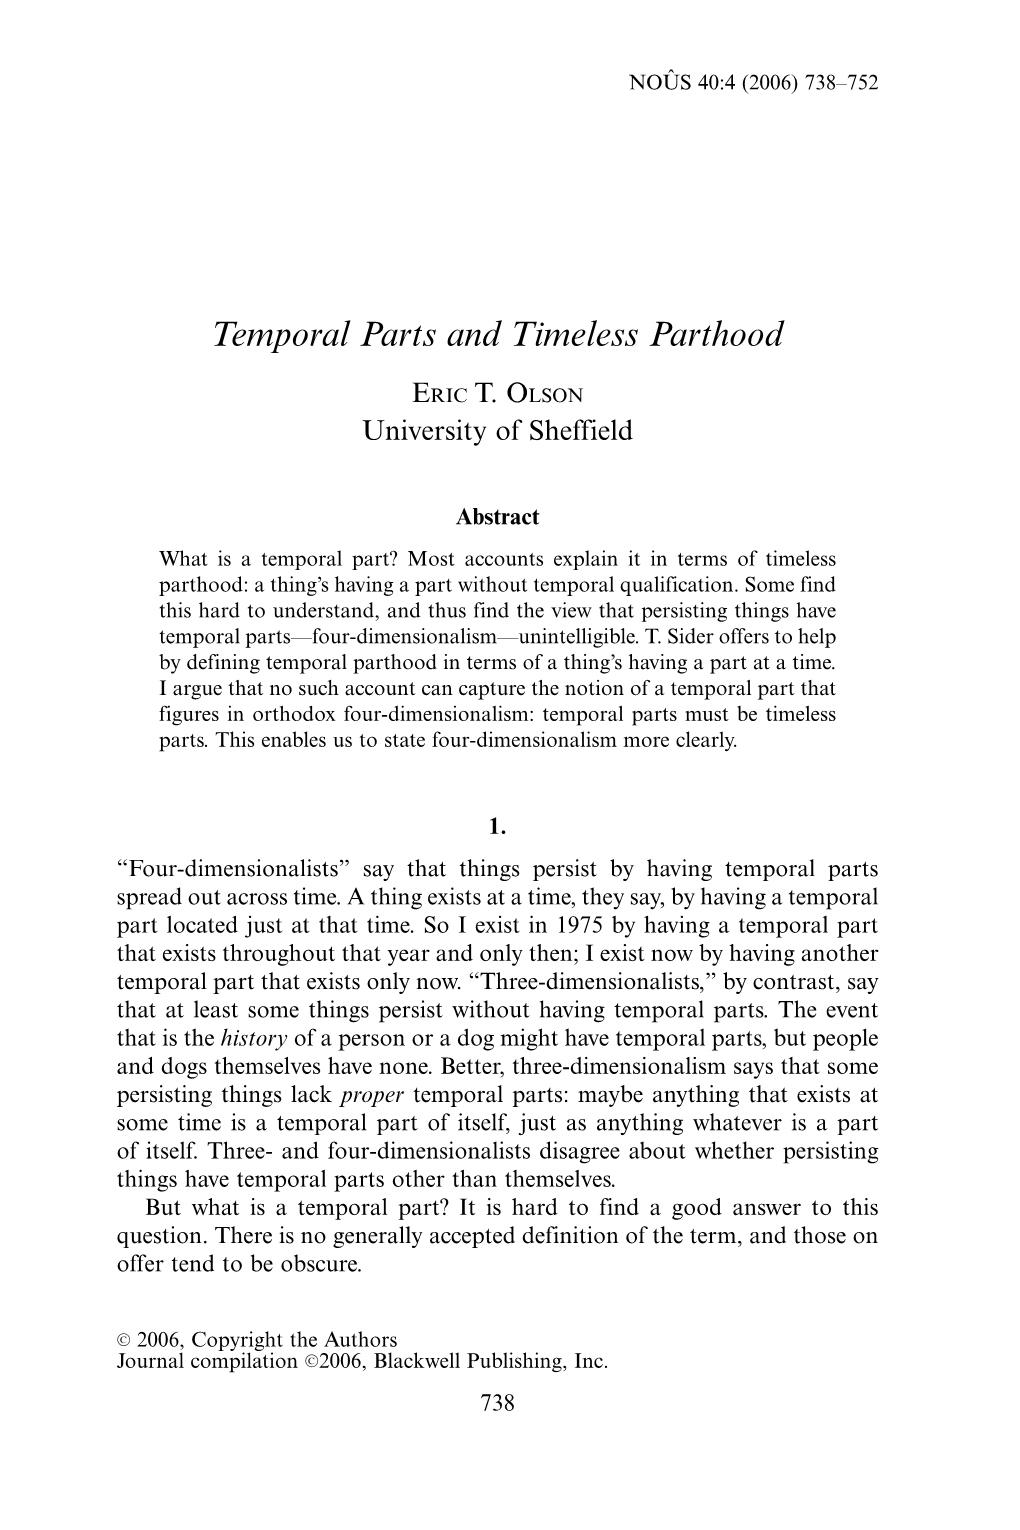 Temporal Parts and Timeless Parthood